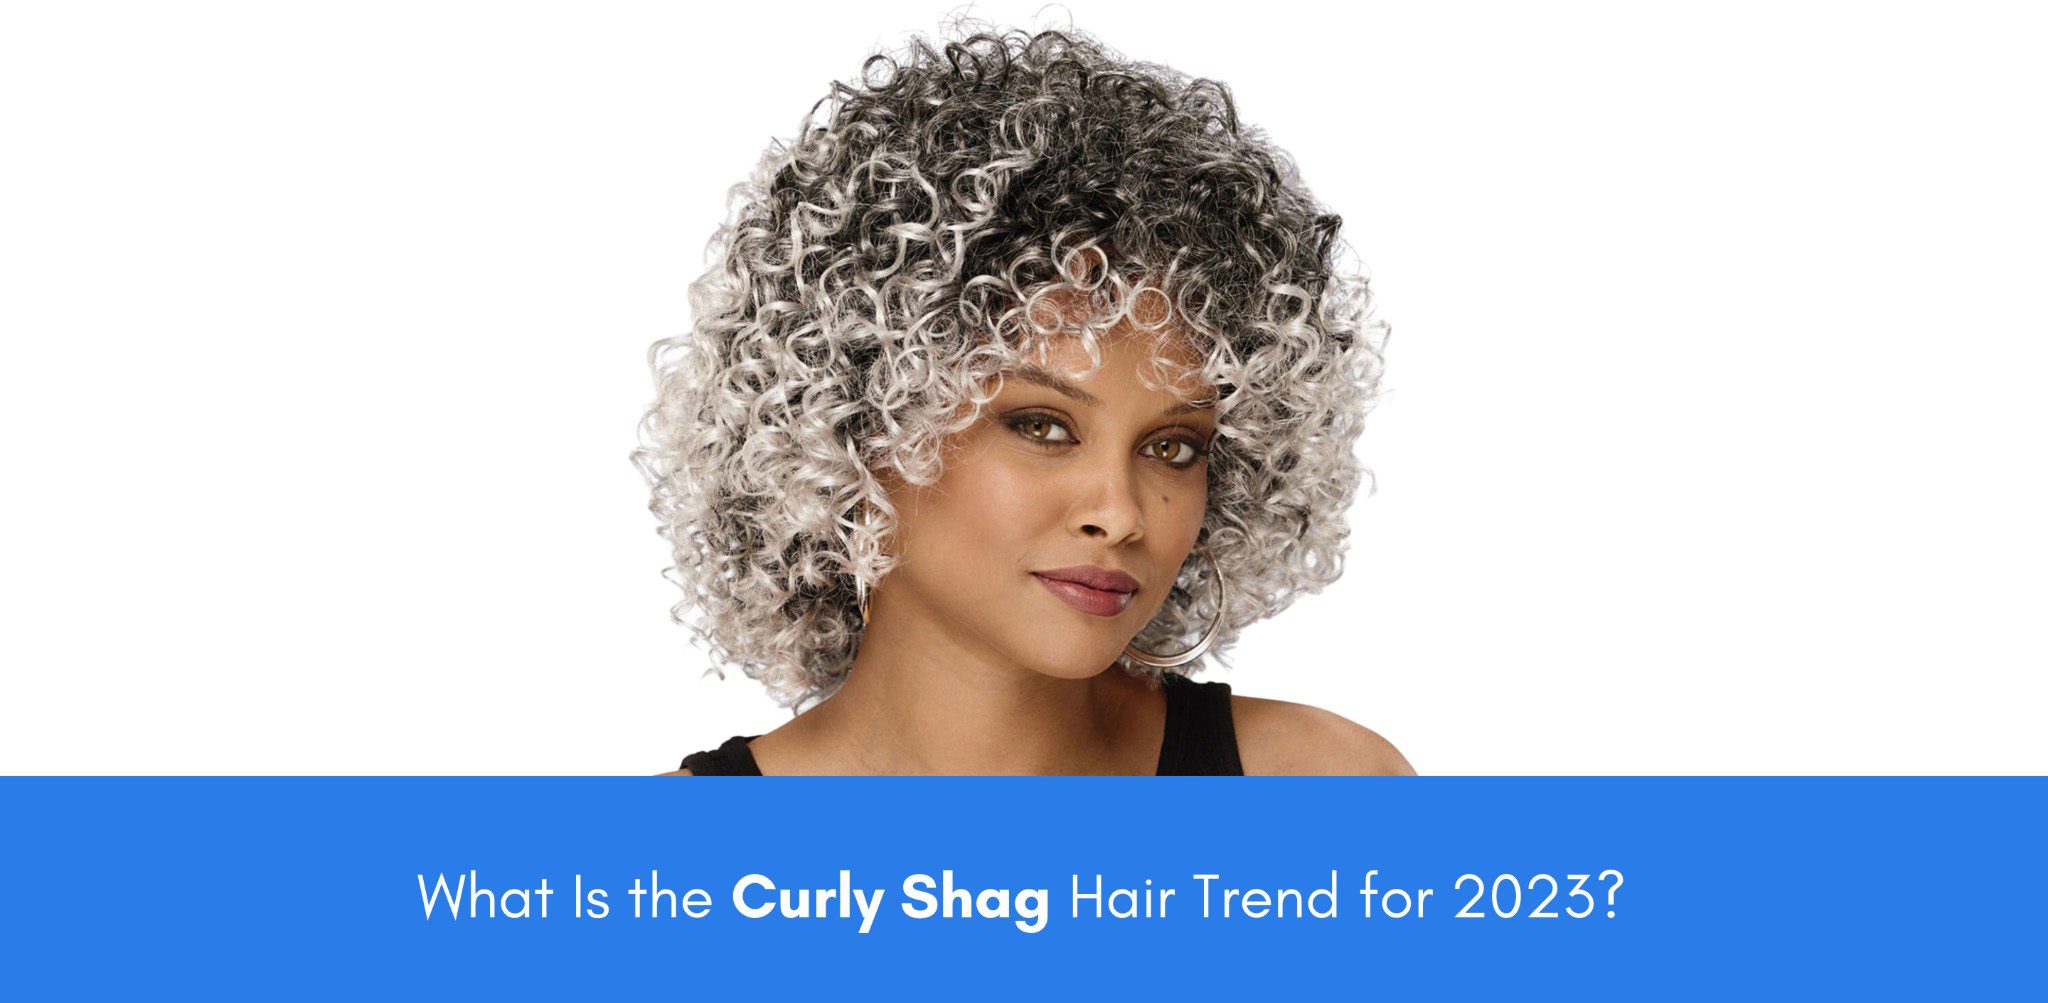 What Is the Curly Shag Hair Trend for 2023?